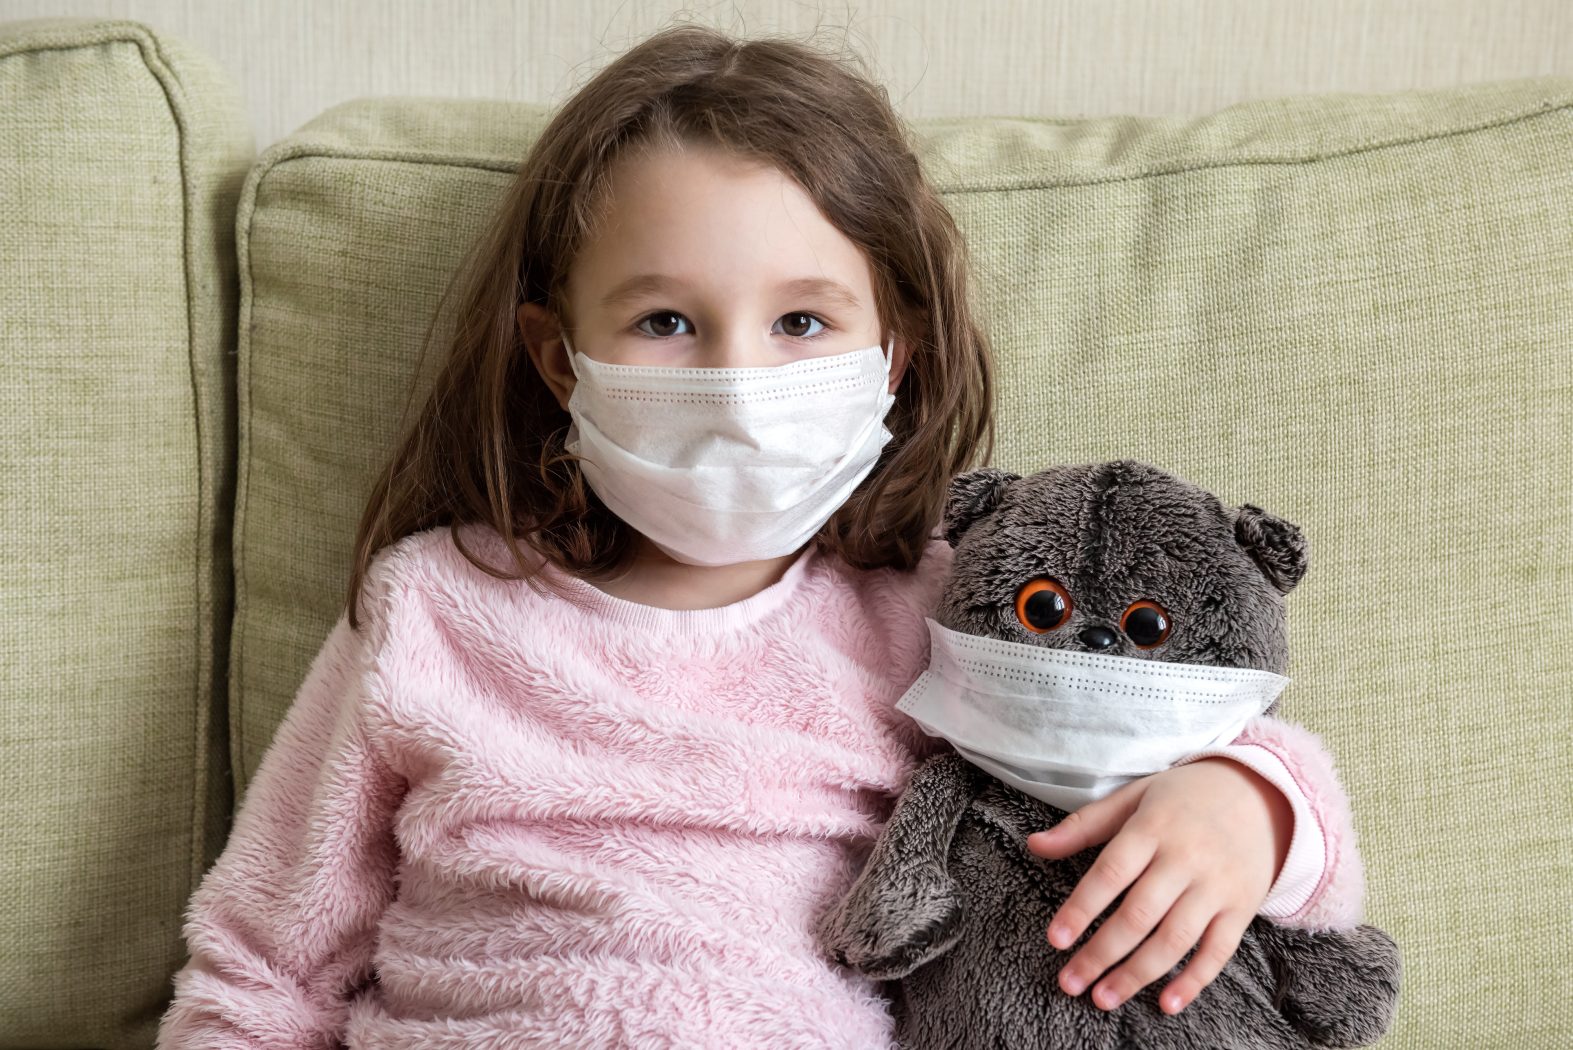 tay at home in quarantine, funny kid with toy on couch during COVID-19 coronavirus pandemic. Little girl in medical mask for protection to corona virus indoors. Safe live and coronavirus concept.